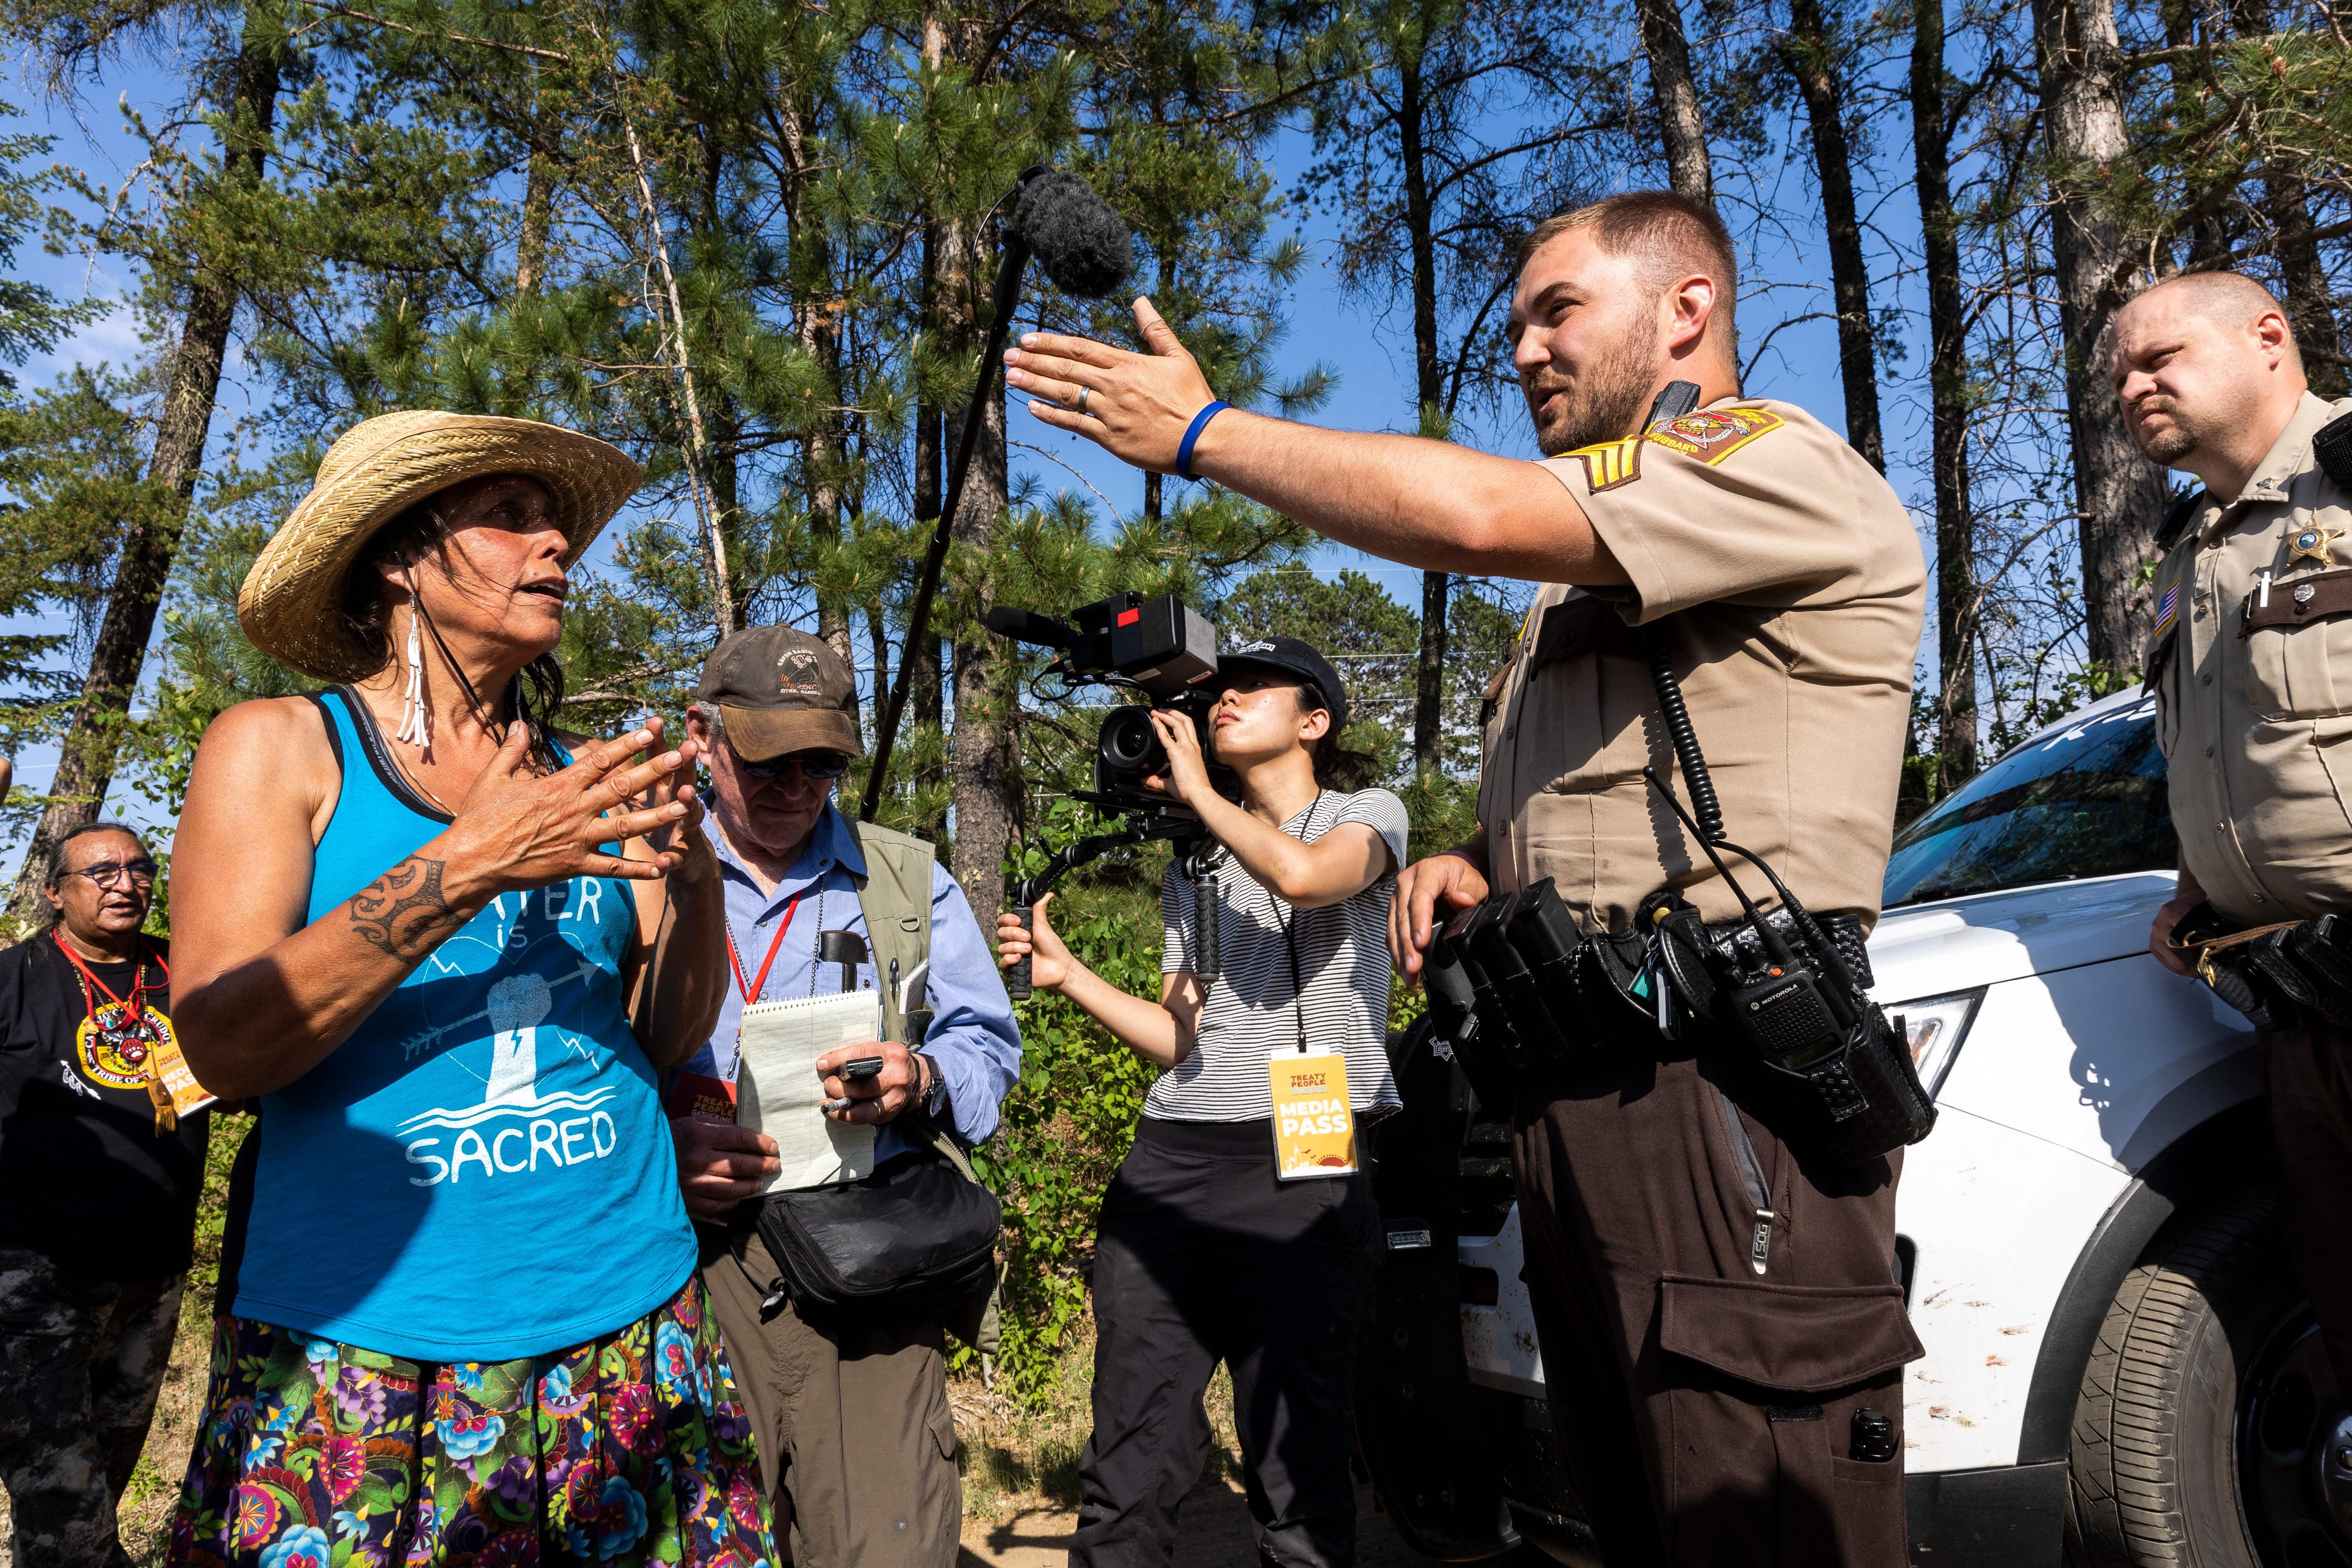 Winona LaDuke, wearing a blue tank top and tan straw hat, talks to the Hubbard County Sheriff in uniform as LaDuke's fellow protestors and media look on.